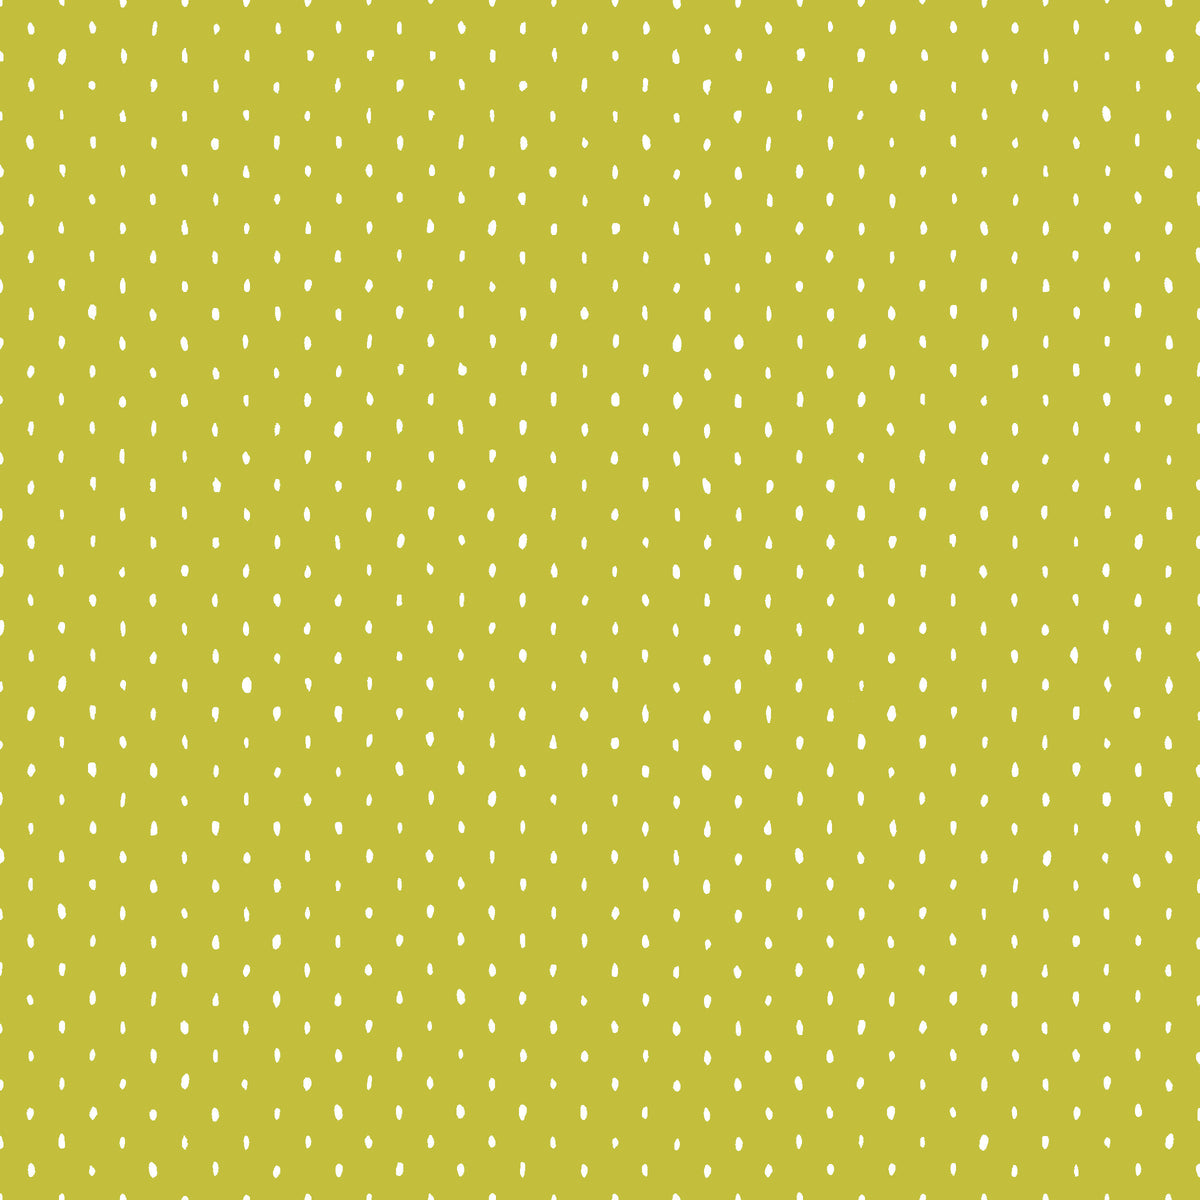 Cotton + Steel Basics Quilt Fabric - Stitch and Repeat (Oval Dots) in Avocado Green/Gold - CS101-AV6